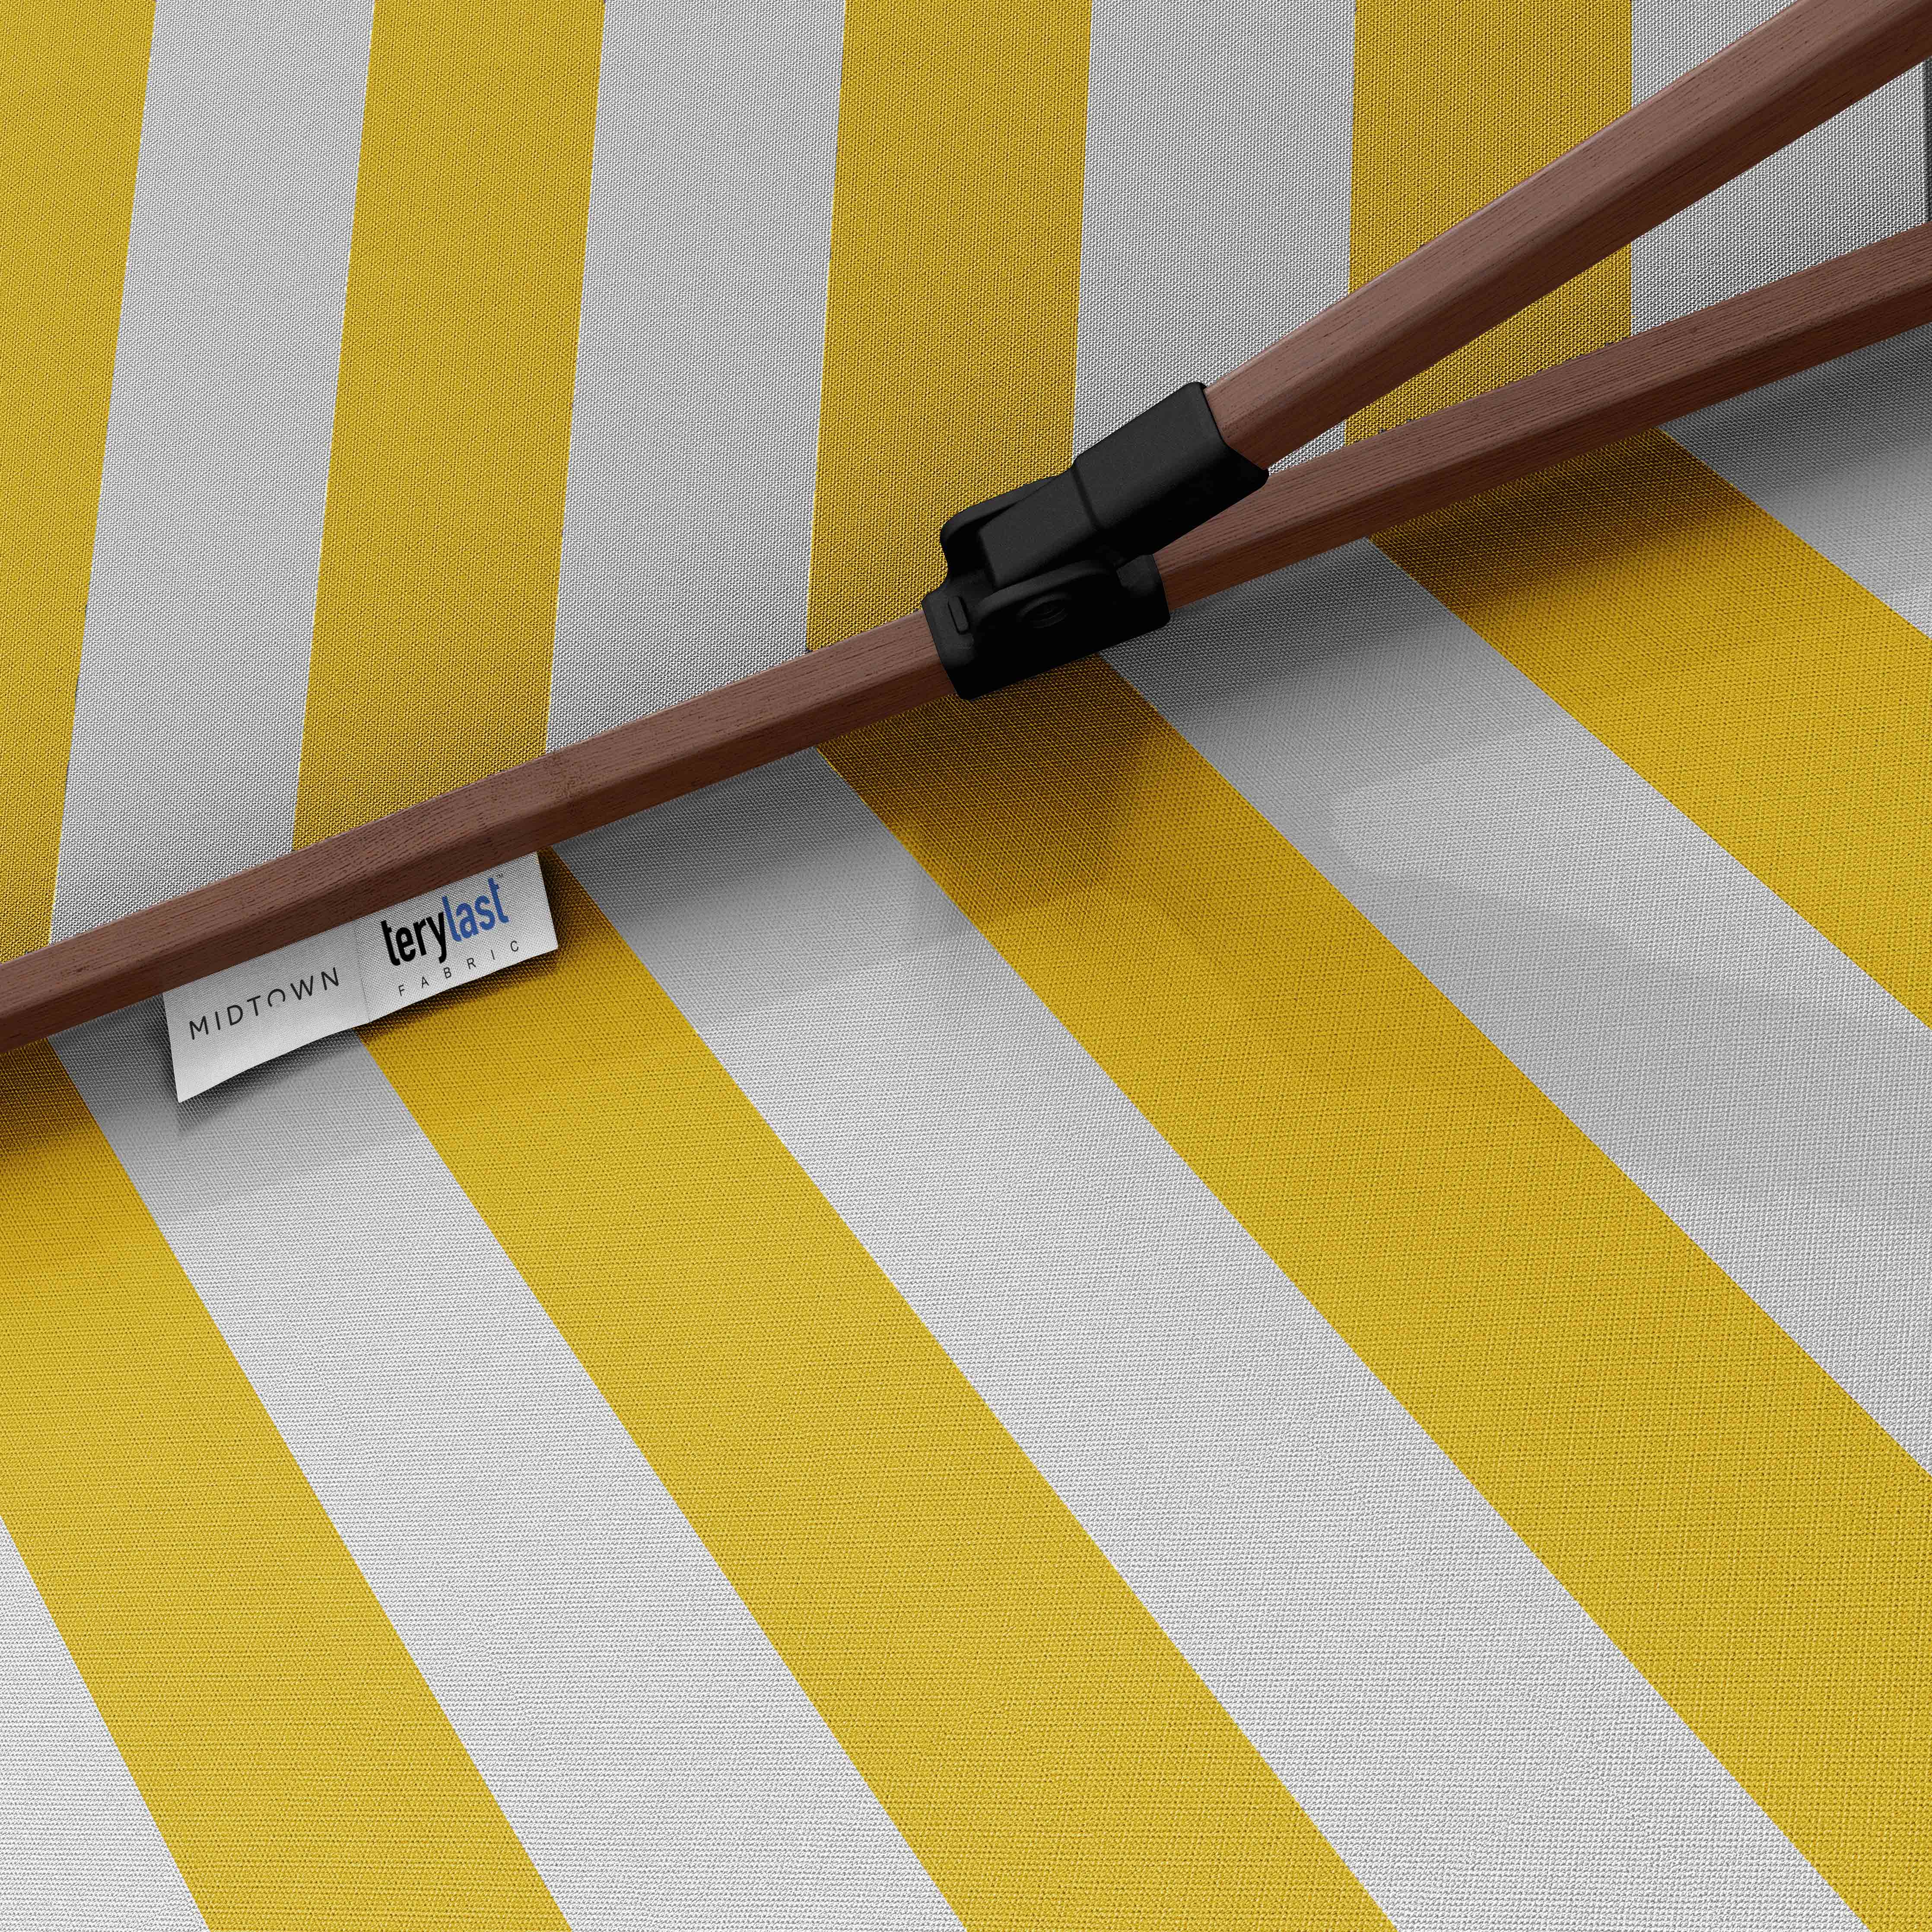 The Wooden™ - Terylast Sunny Stripes